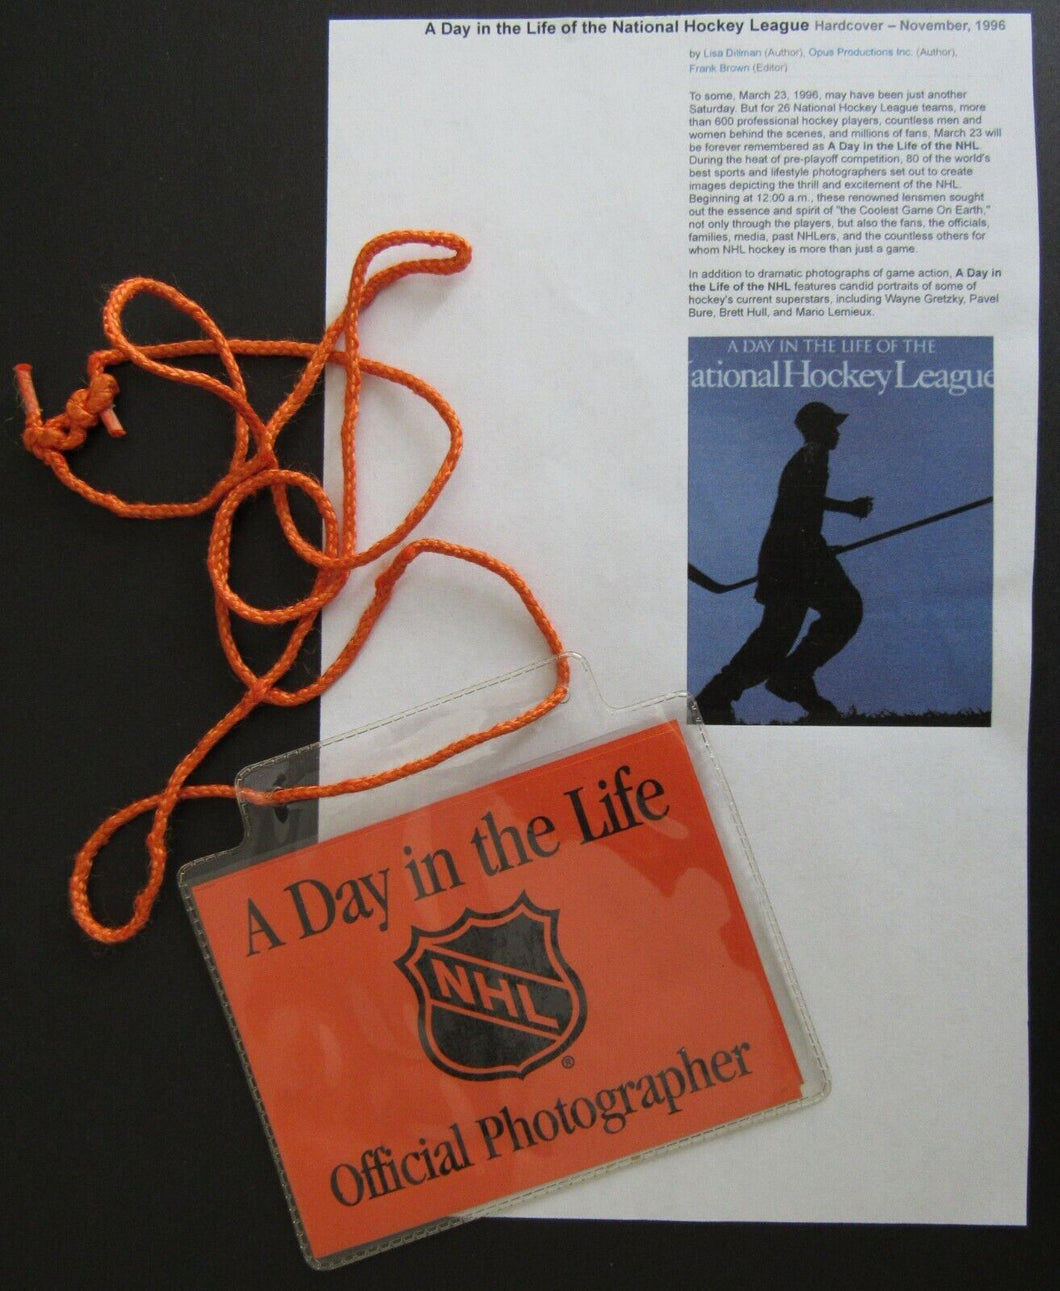 1996 Photographers Pass + Lanyard A Day In Life Of The National Hockey League